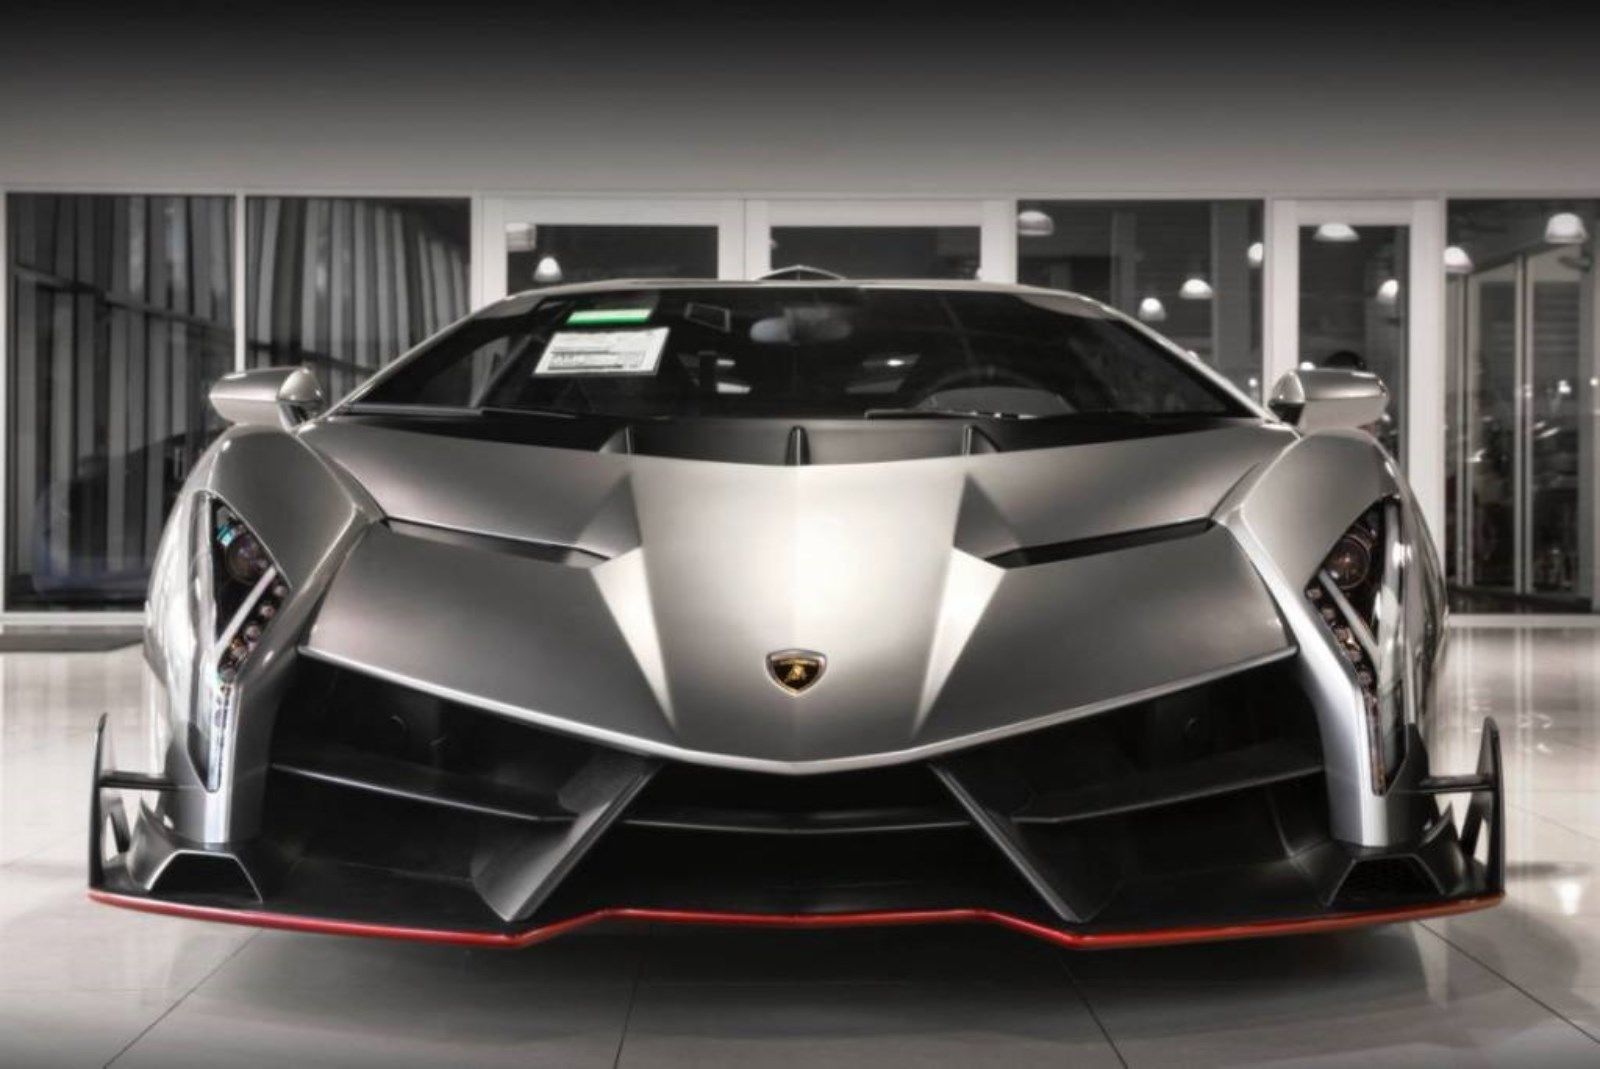 Looking to buy a Lamborghini Veneno? This went on sale for $ 9.4 million